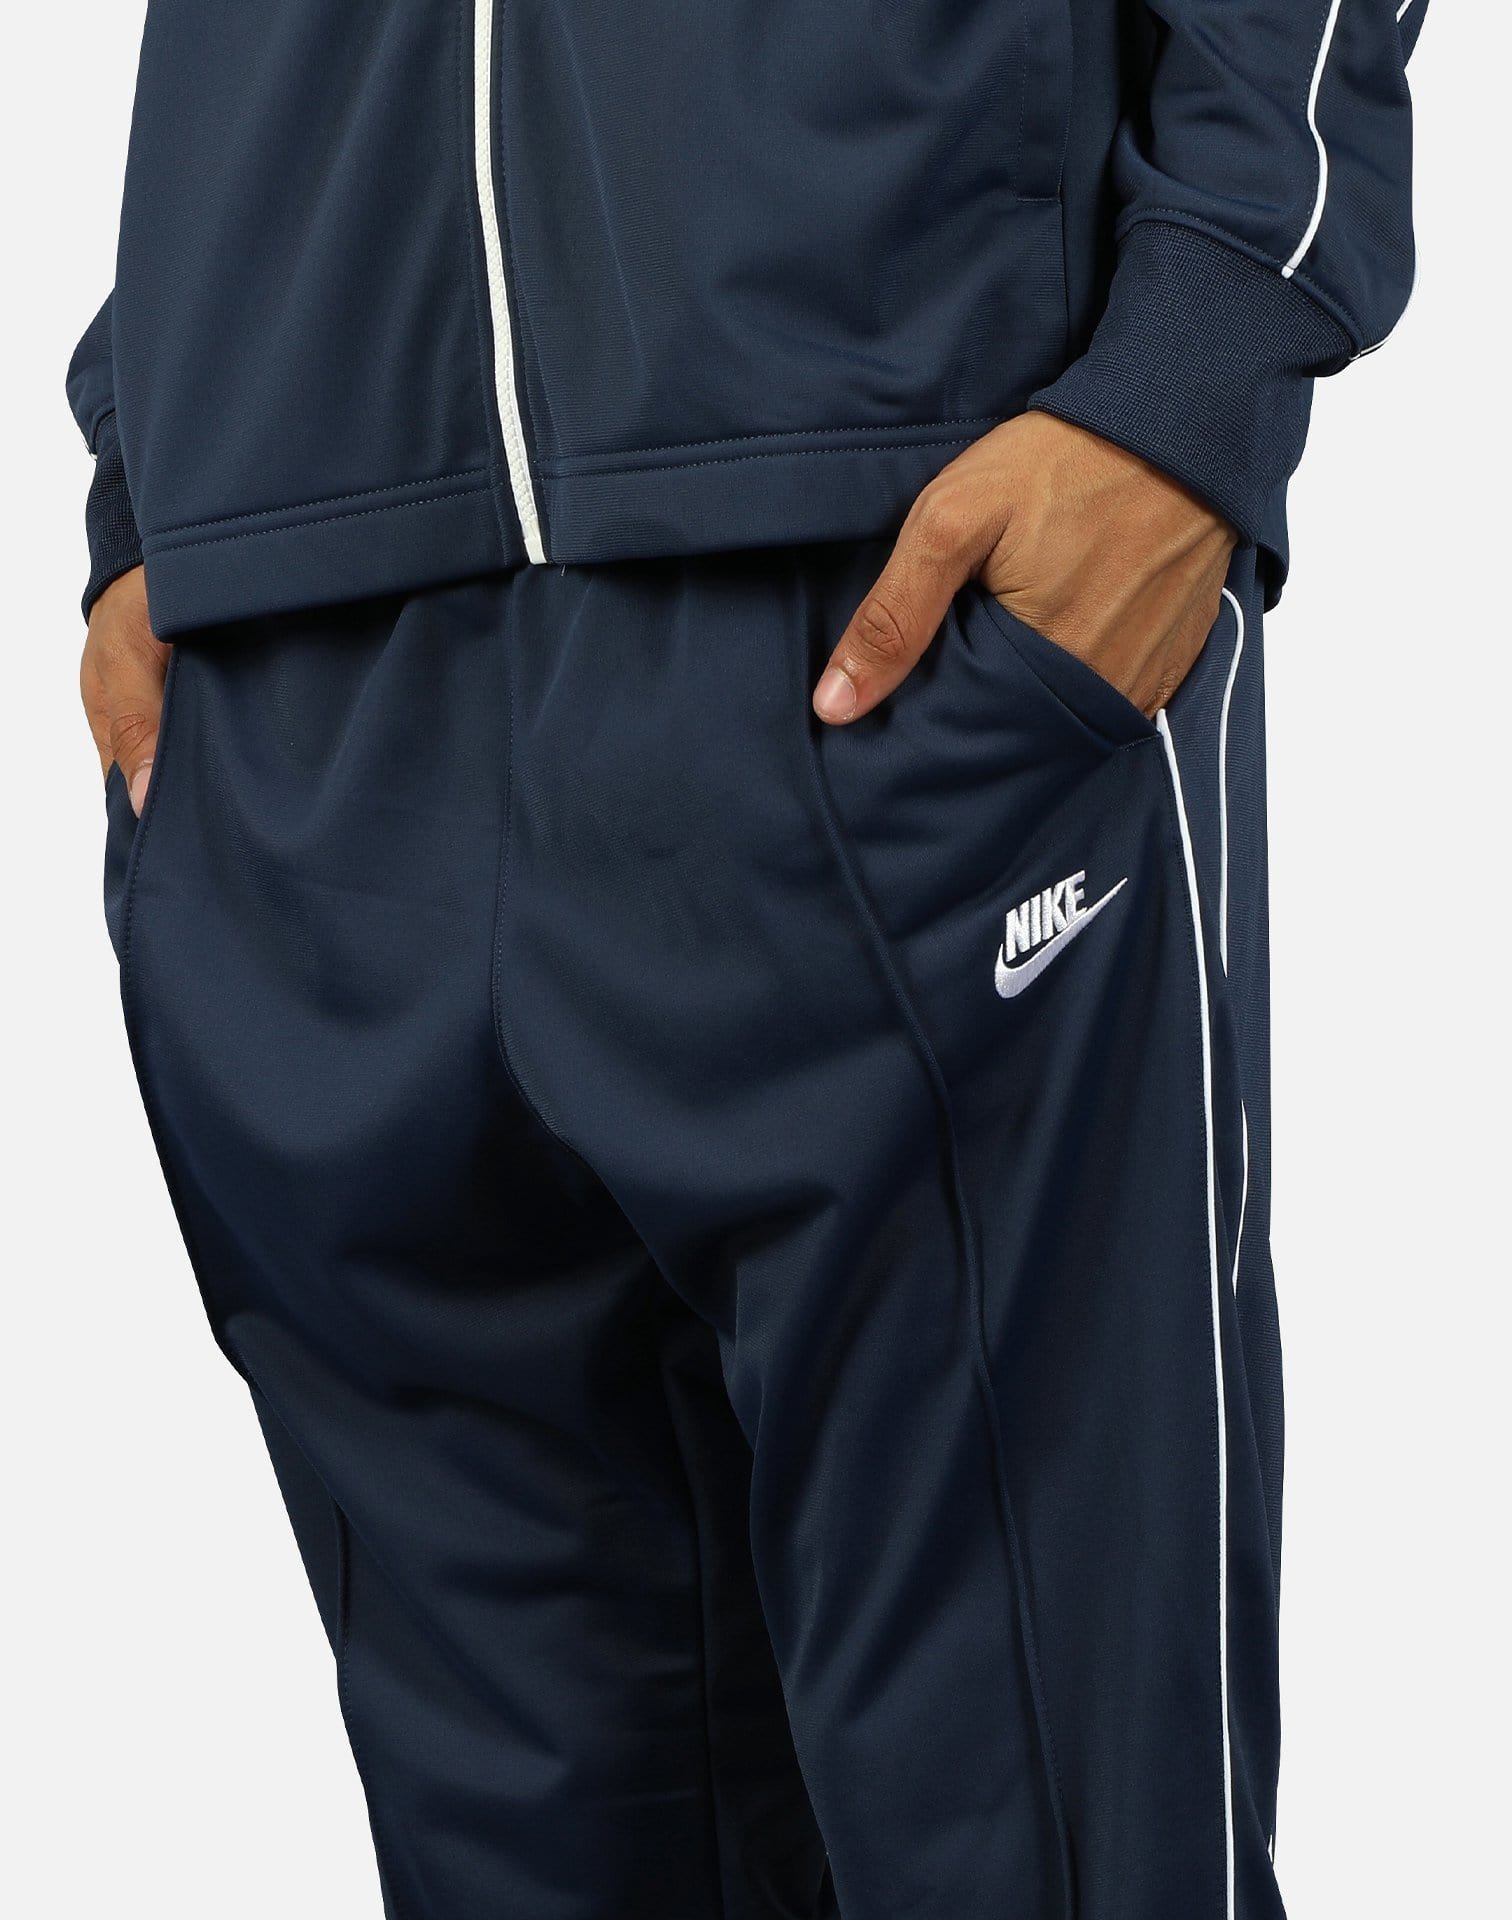 NSW TRACK PANTS – DTLR